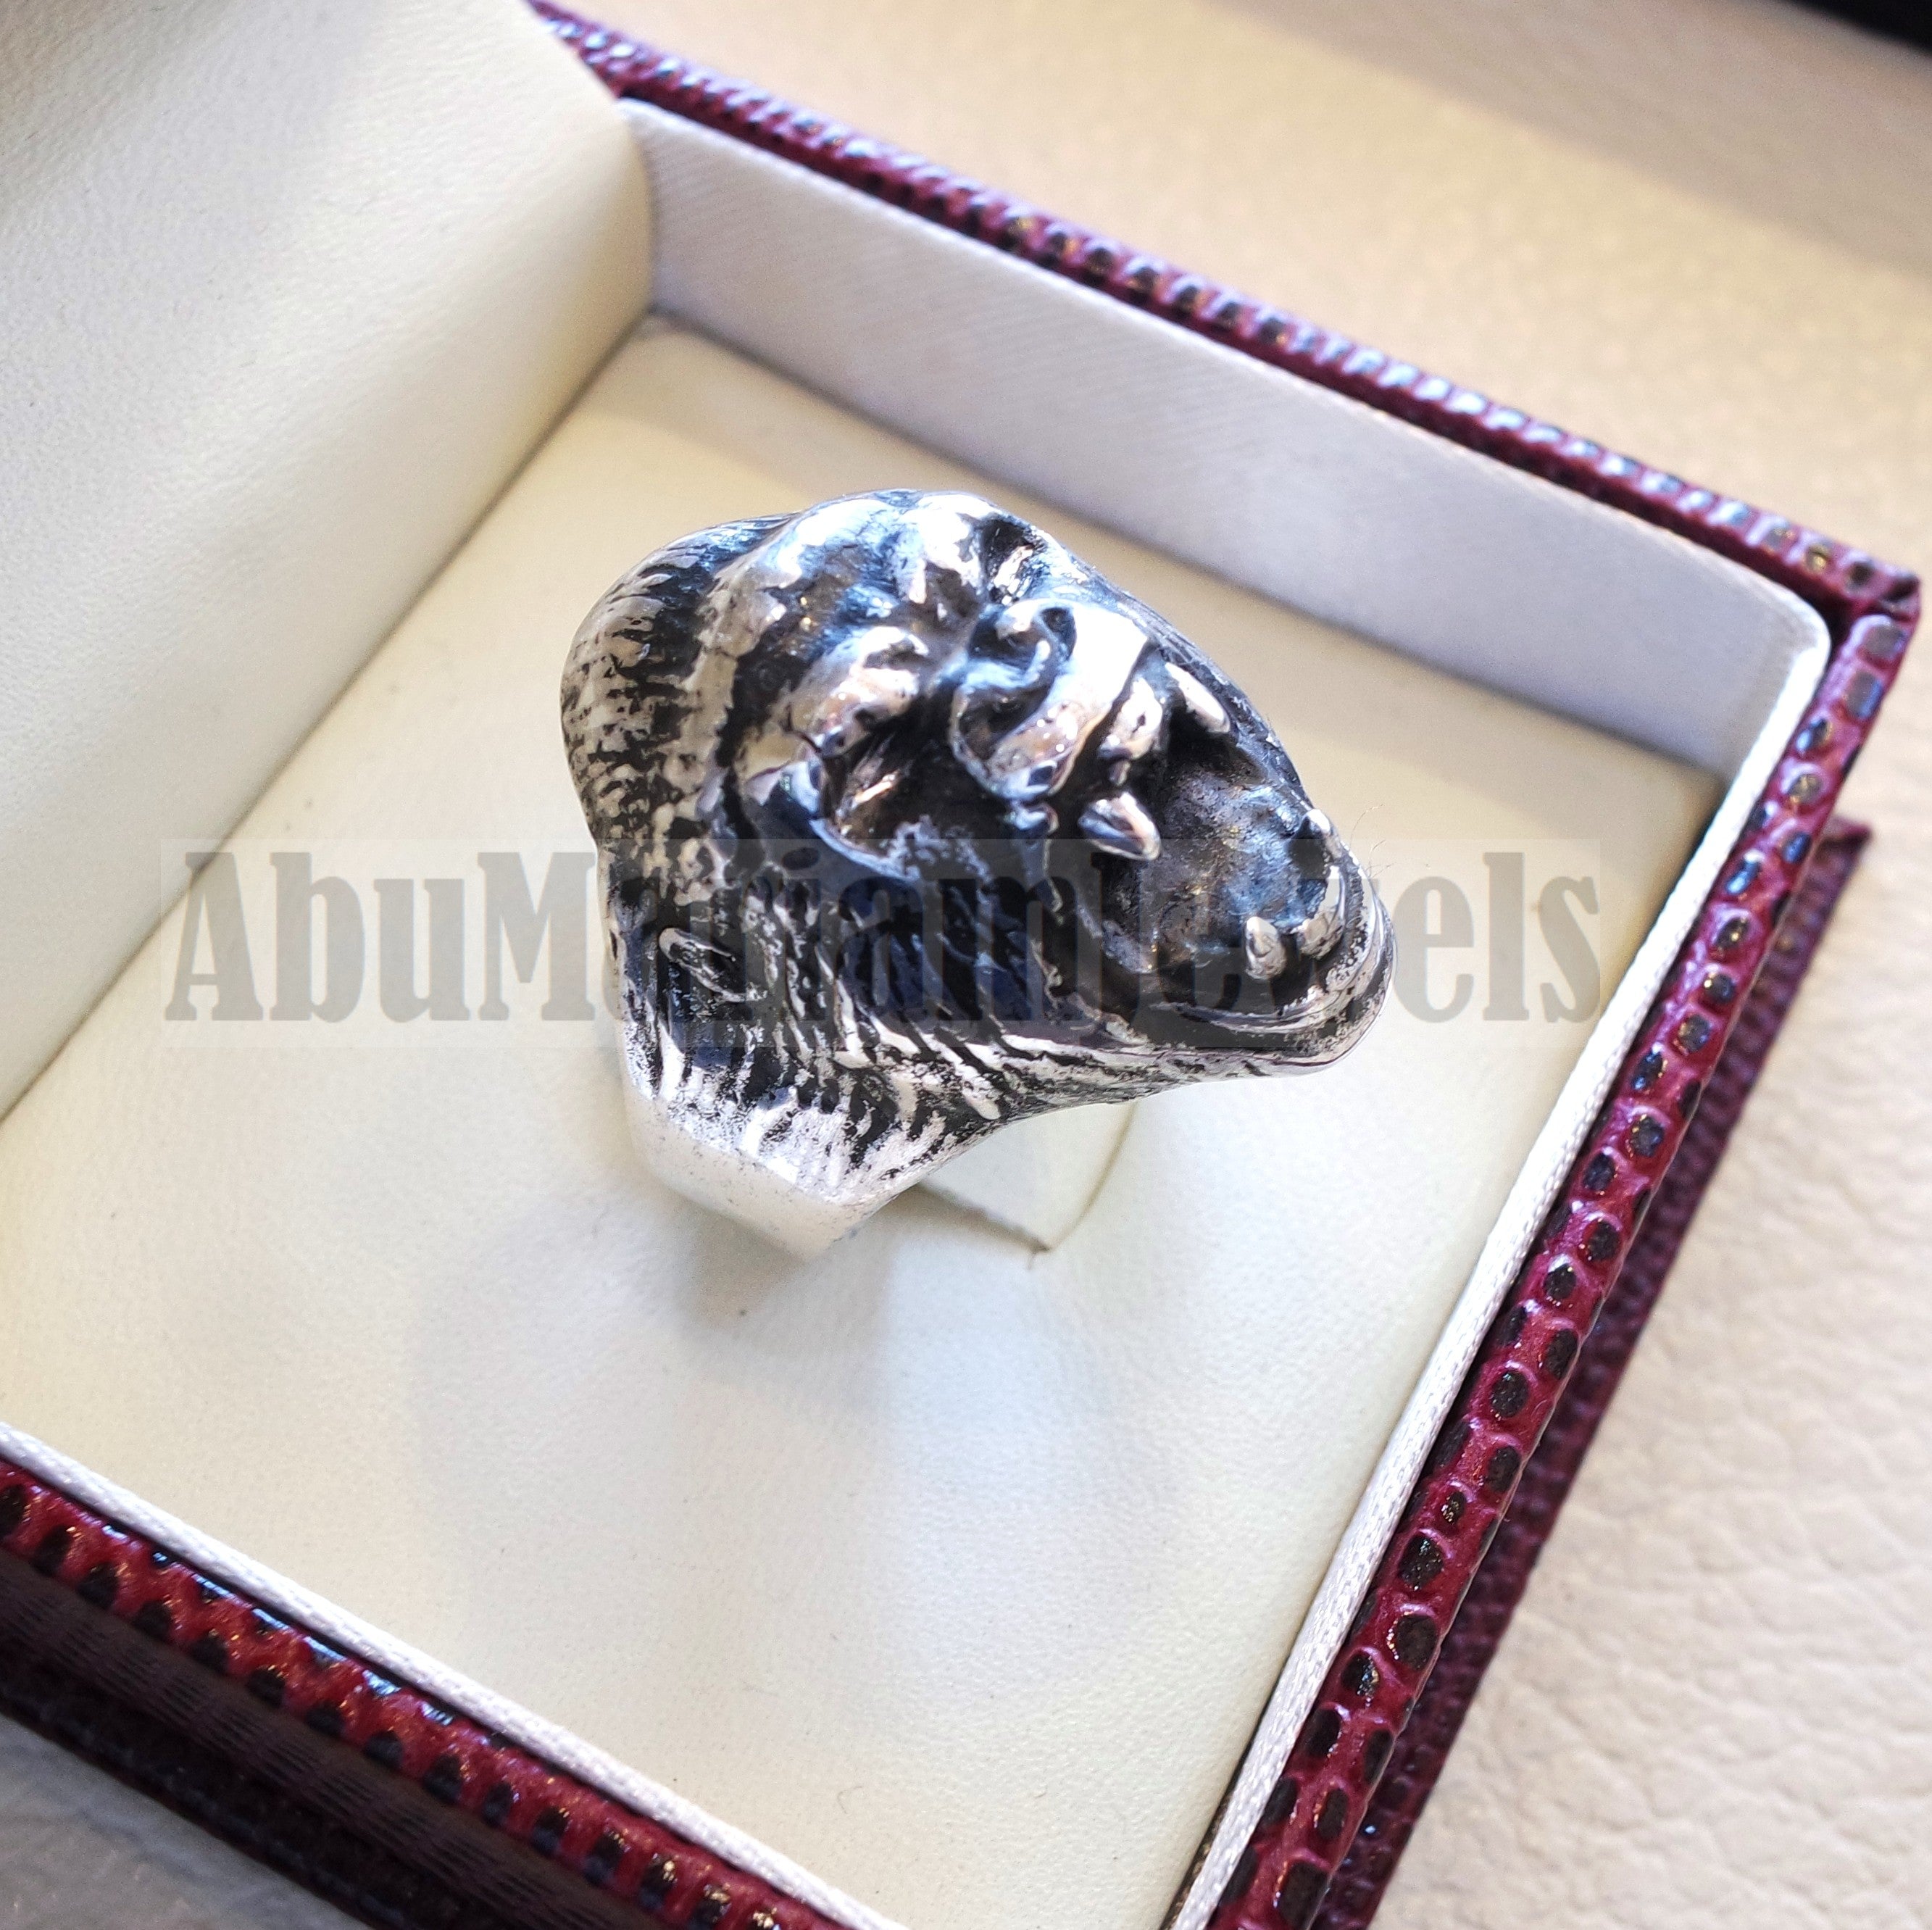 huge Gorilla ring very heavy sterling silver 925 man biker ring all sizes handmade animal head jewelry fast shipping detailed craftsmanship